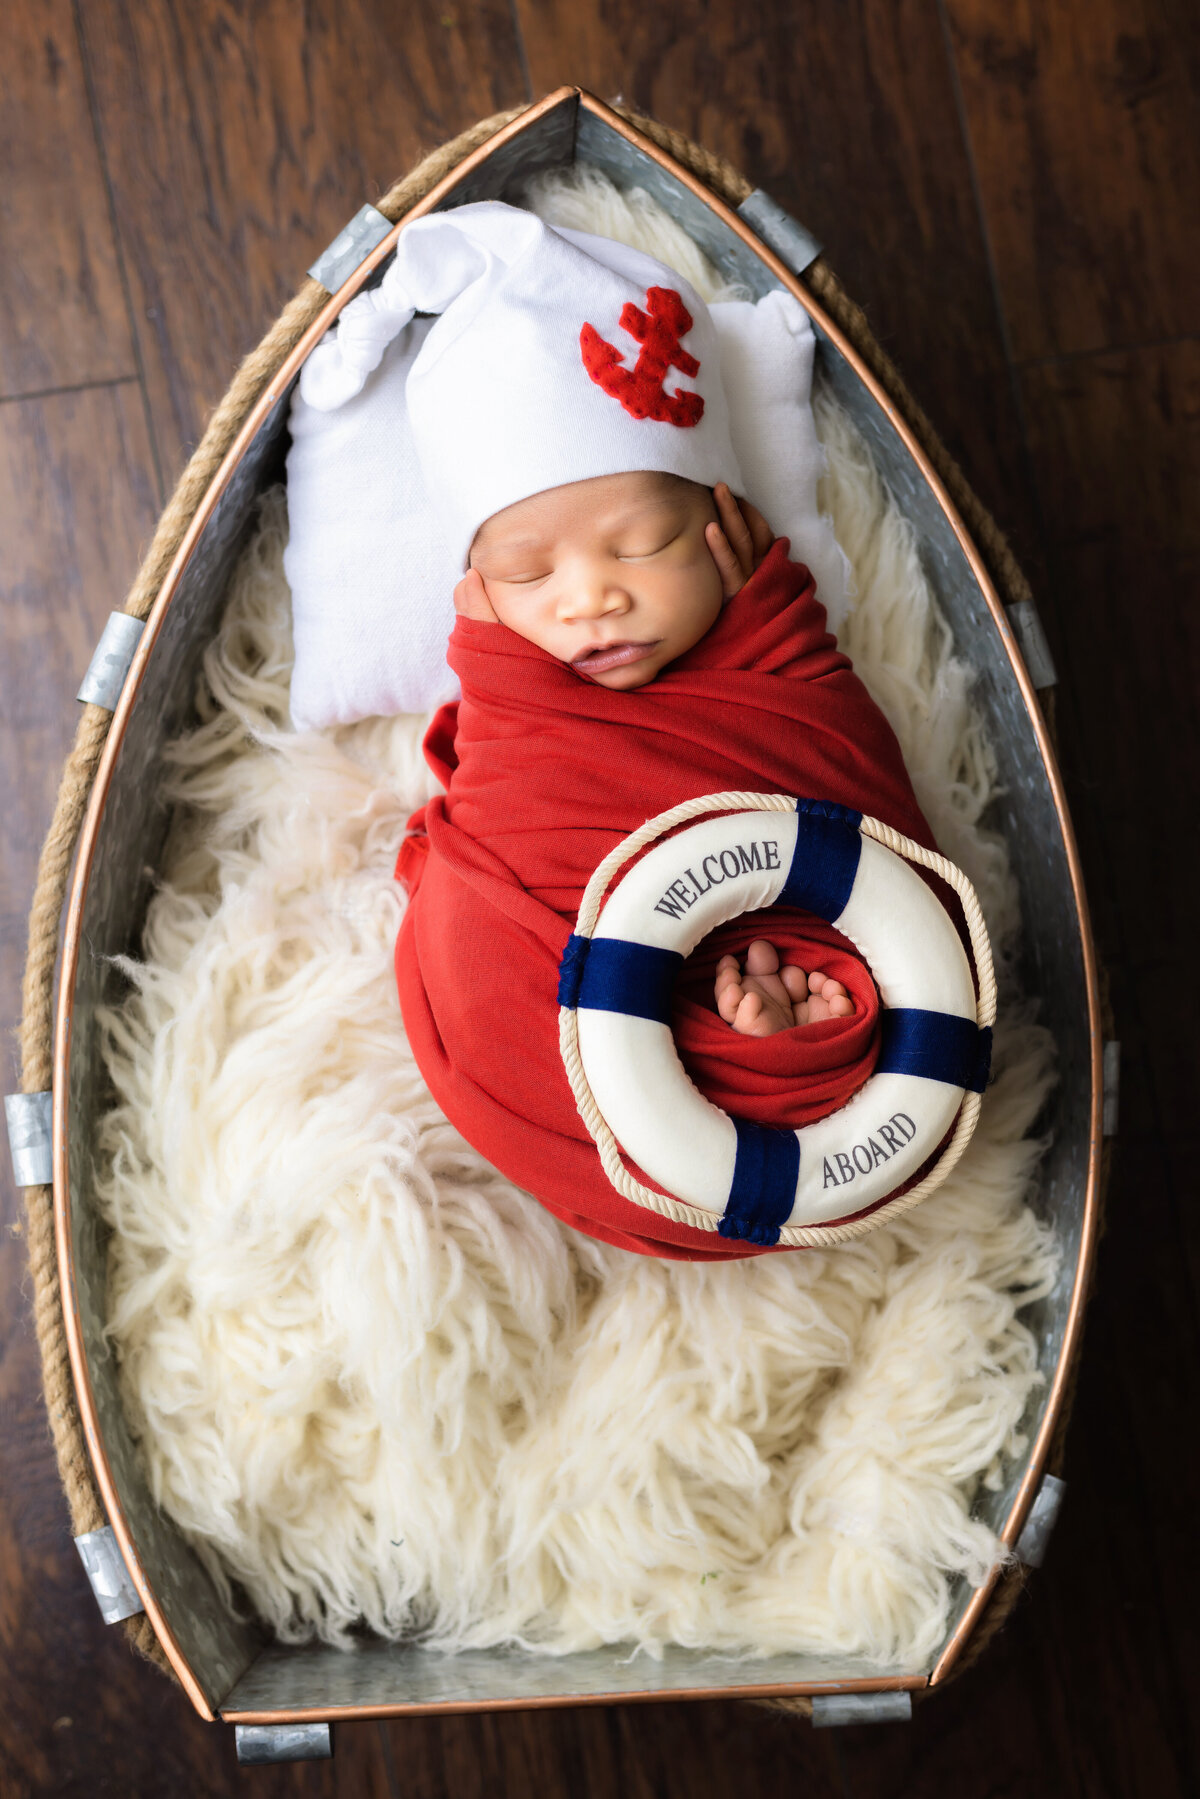 Newborn Photographer, a  baby sleeps in a boat shaped basket on a fluffy blanket, there a lifesaver that reads "welcome aboard"